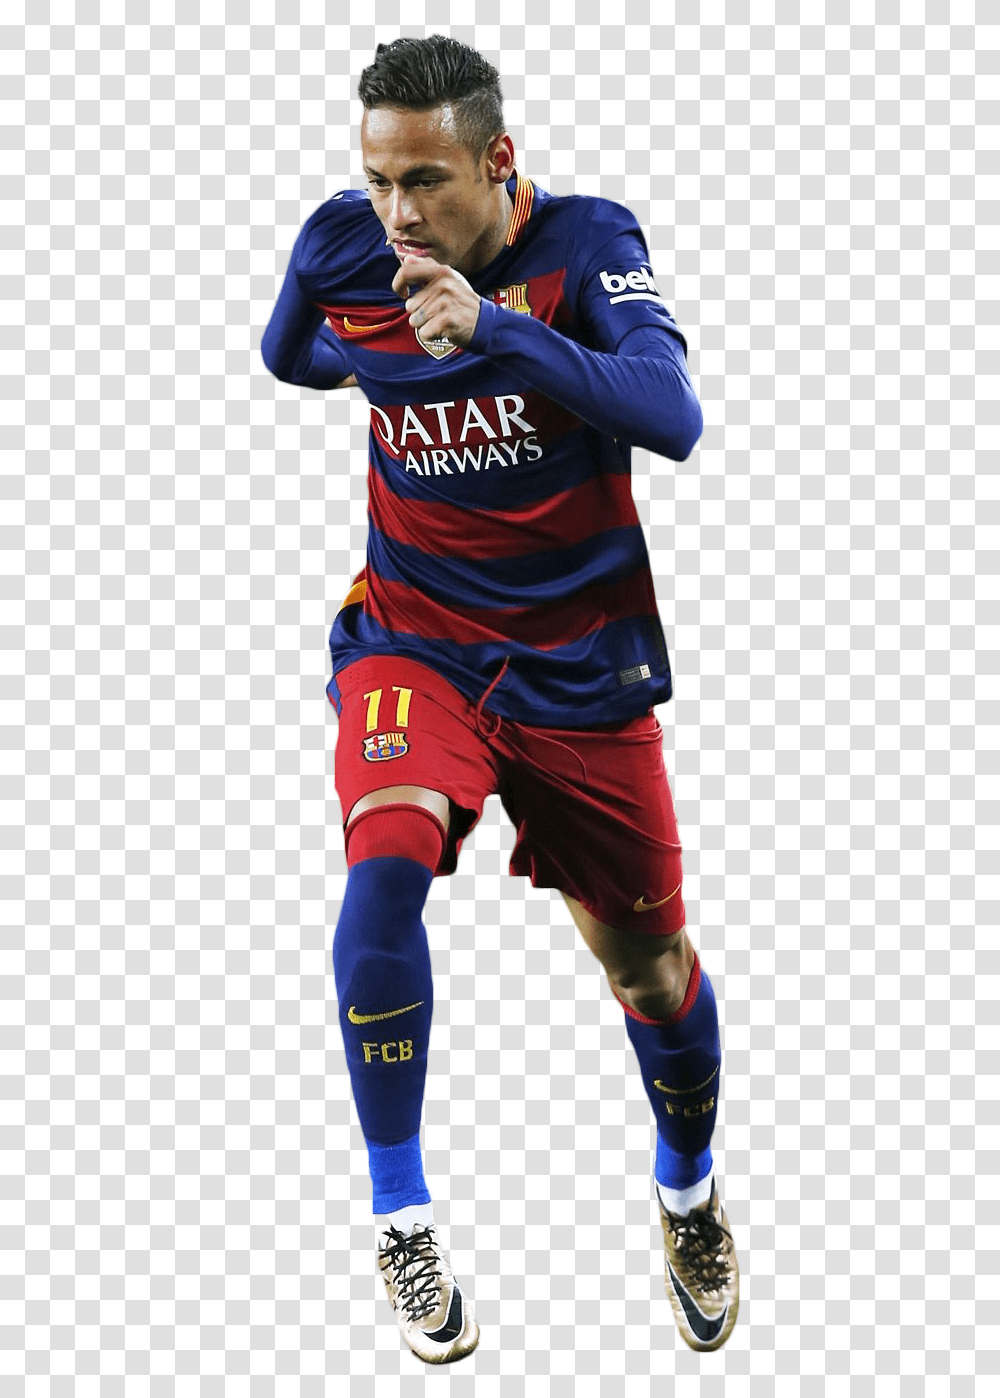 Messi And Neymar Clipart Hd Neymar Background, Person, Shorts, Sphere Transparent Png